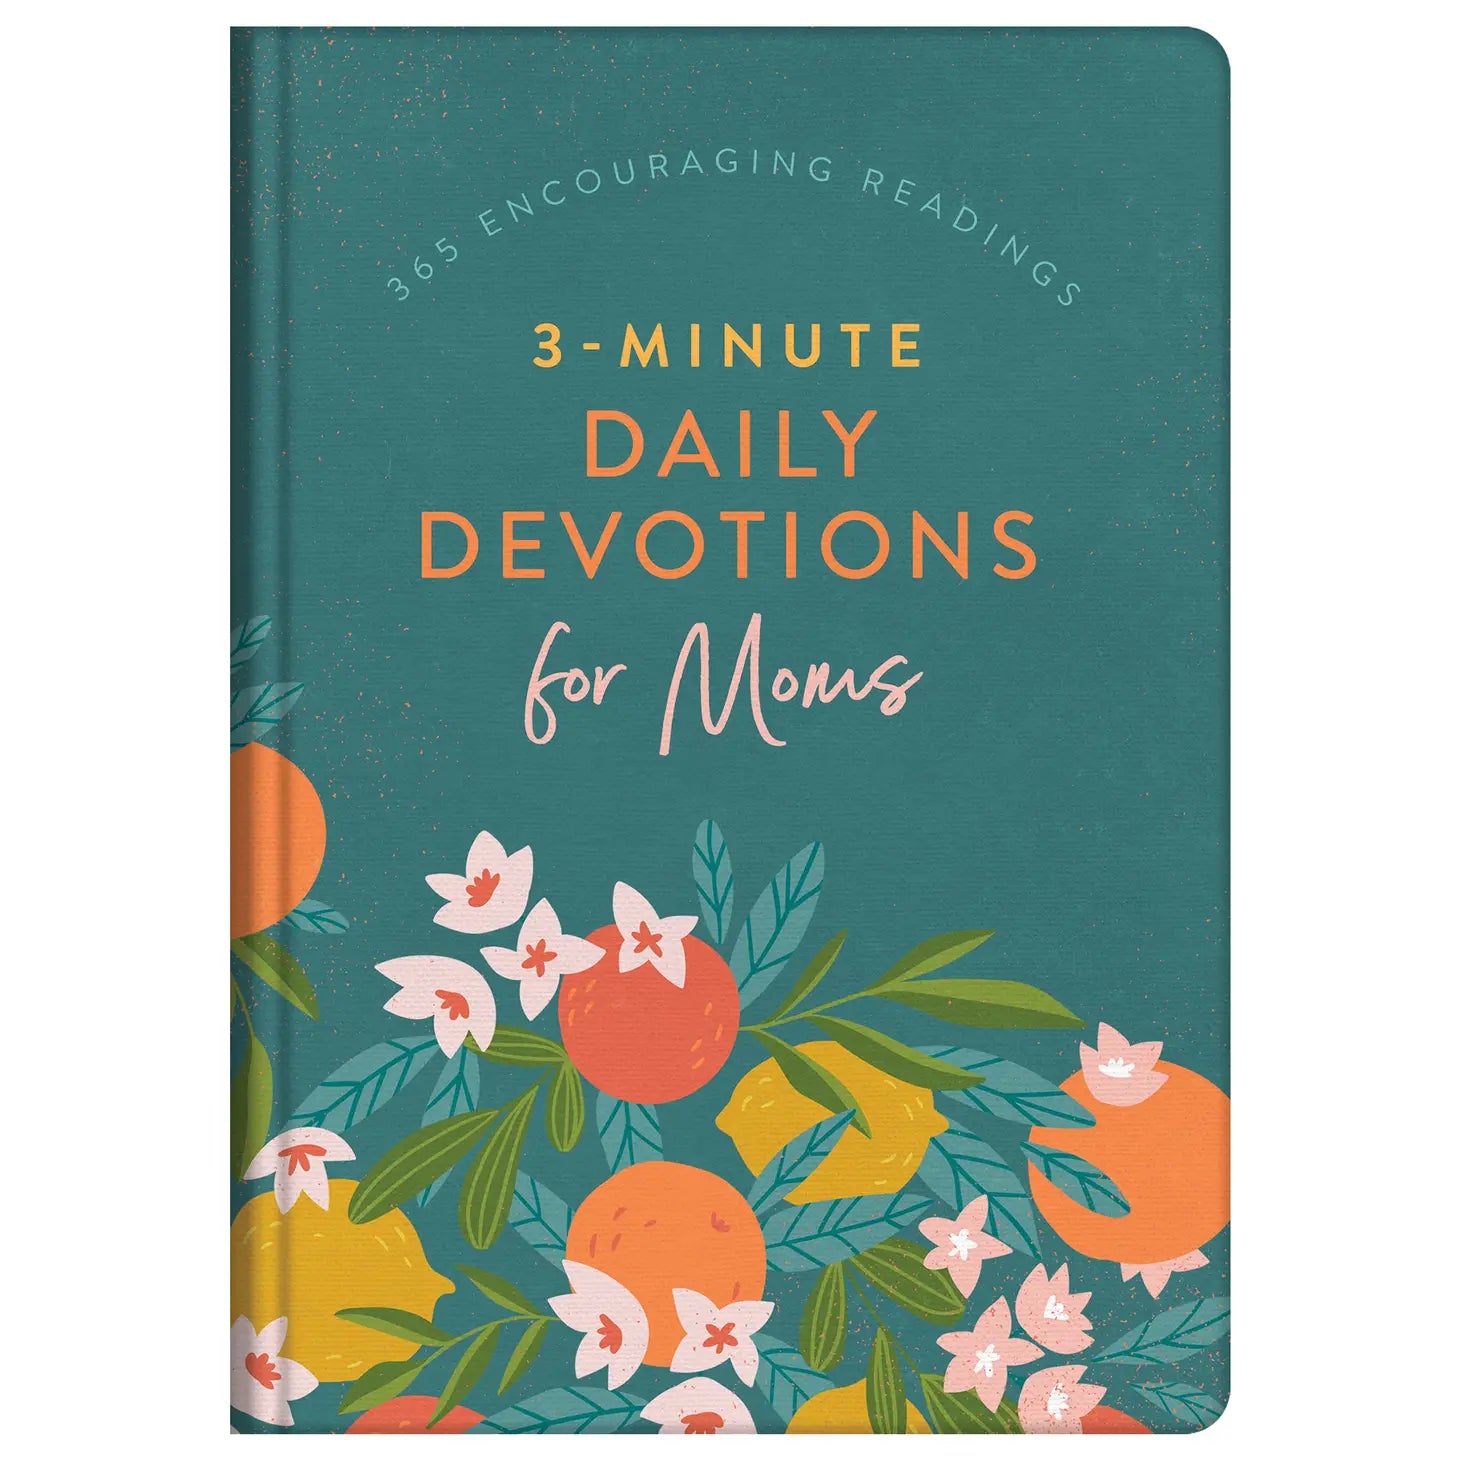 3-Minute Daily Devotions for Moms Book  - Doodlebug's Children's Boutique